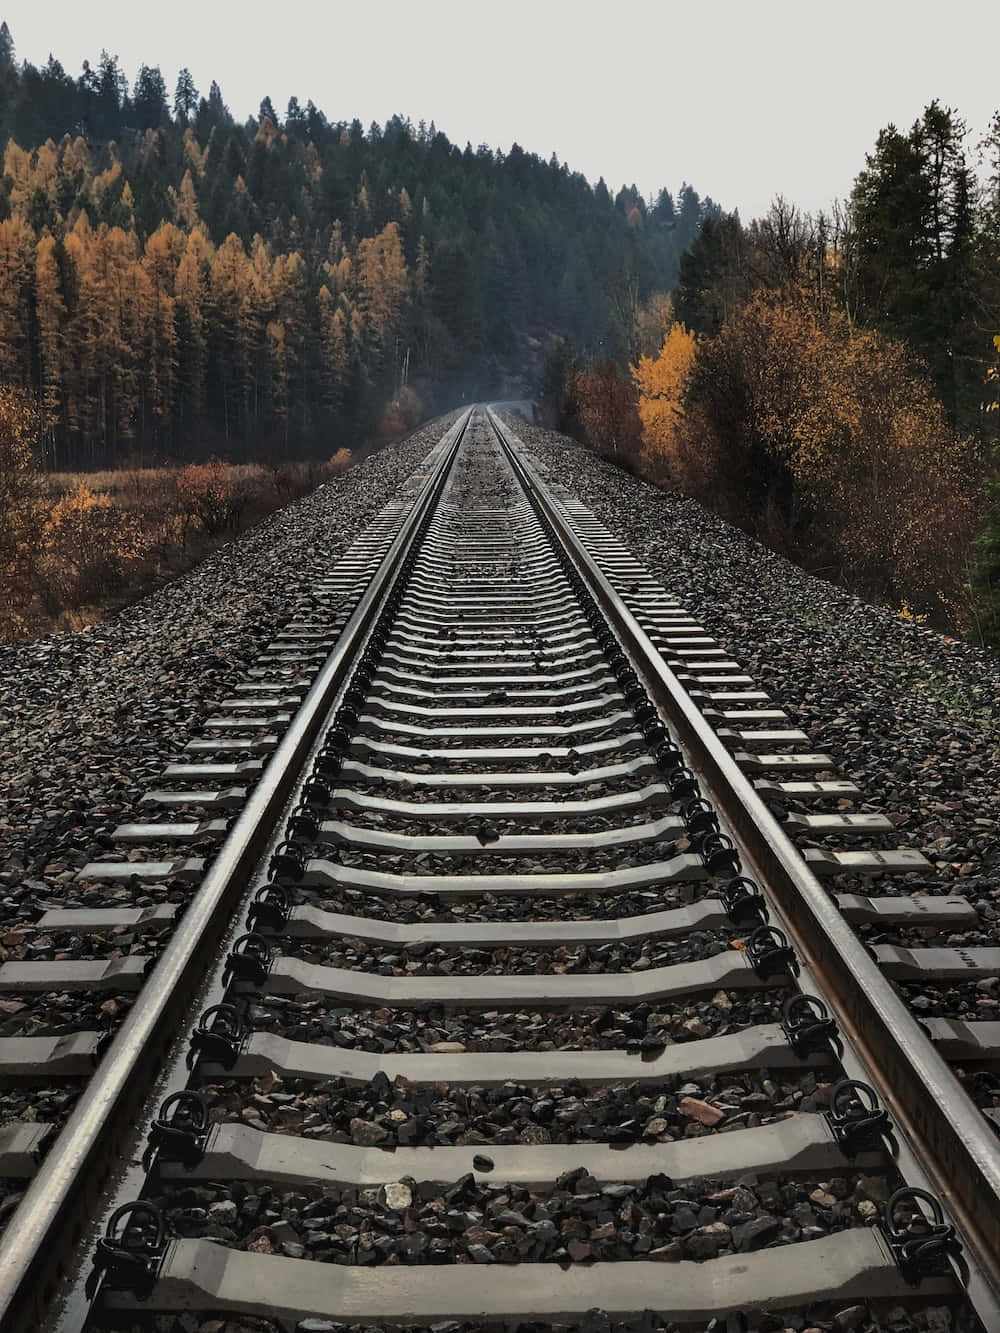 Train Tracks Railway Between Tall Trees Picture